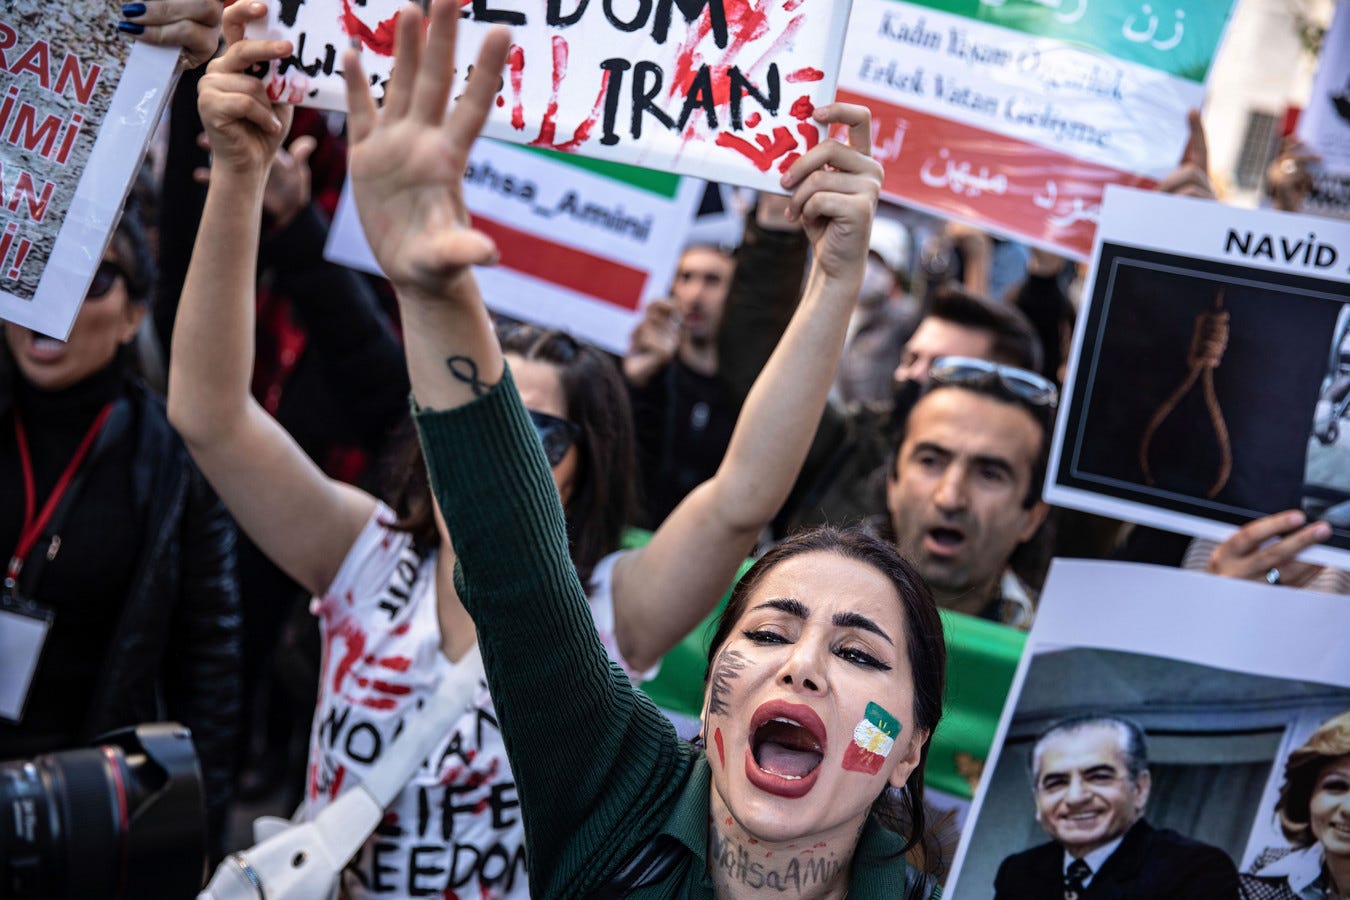 Protesters hold placards while chanting slogans outside the Iranian Consulate in Istanbul during the demonstration.